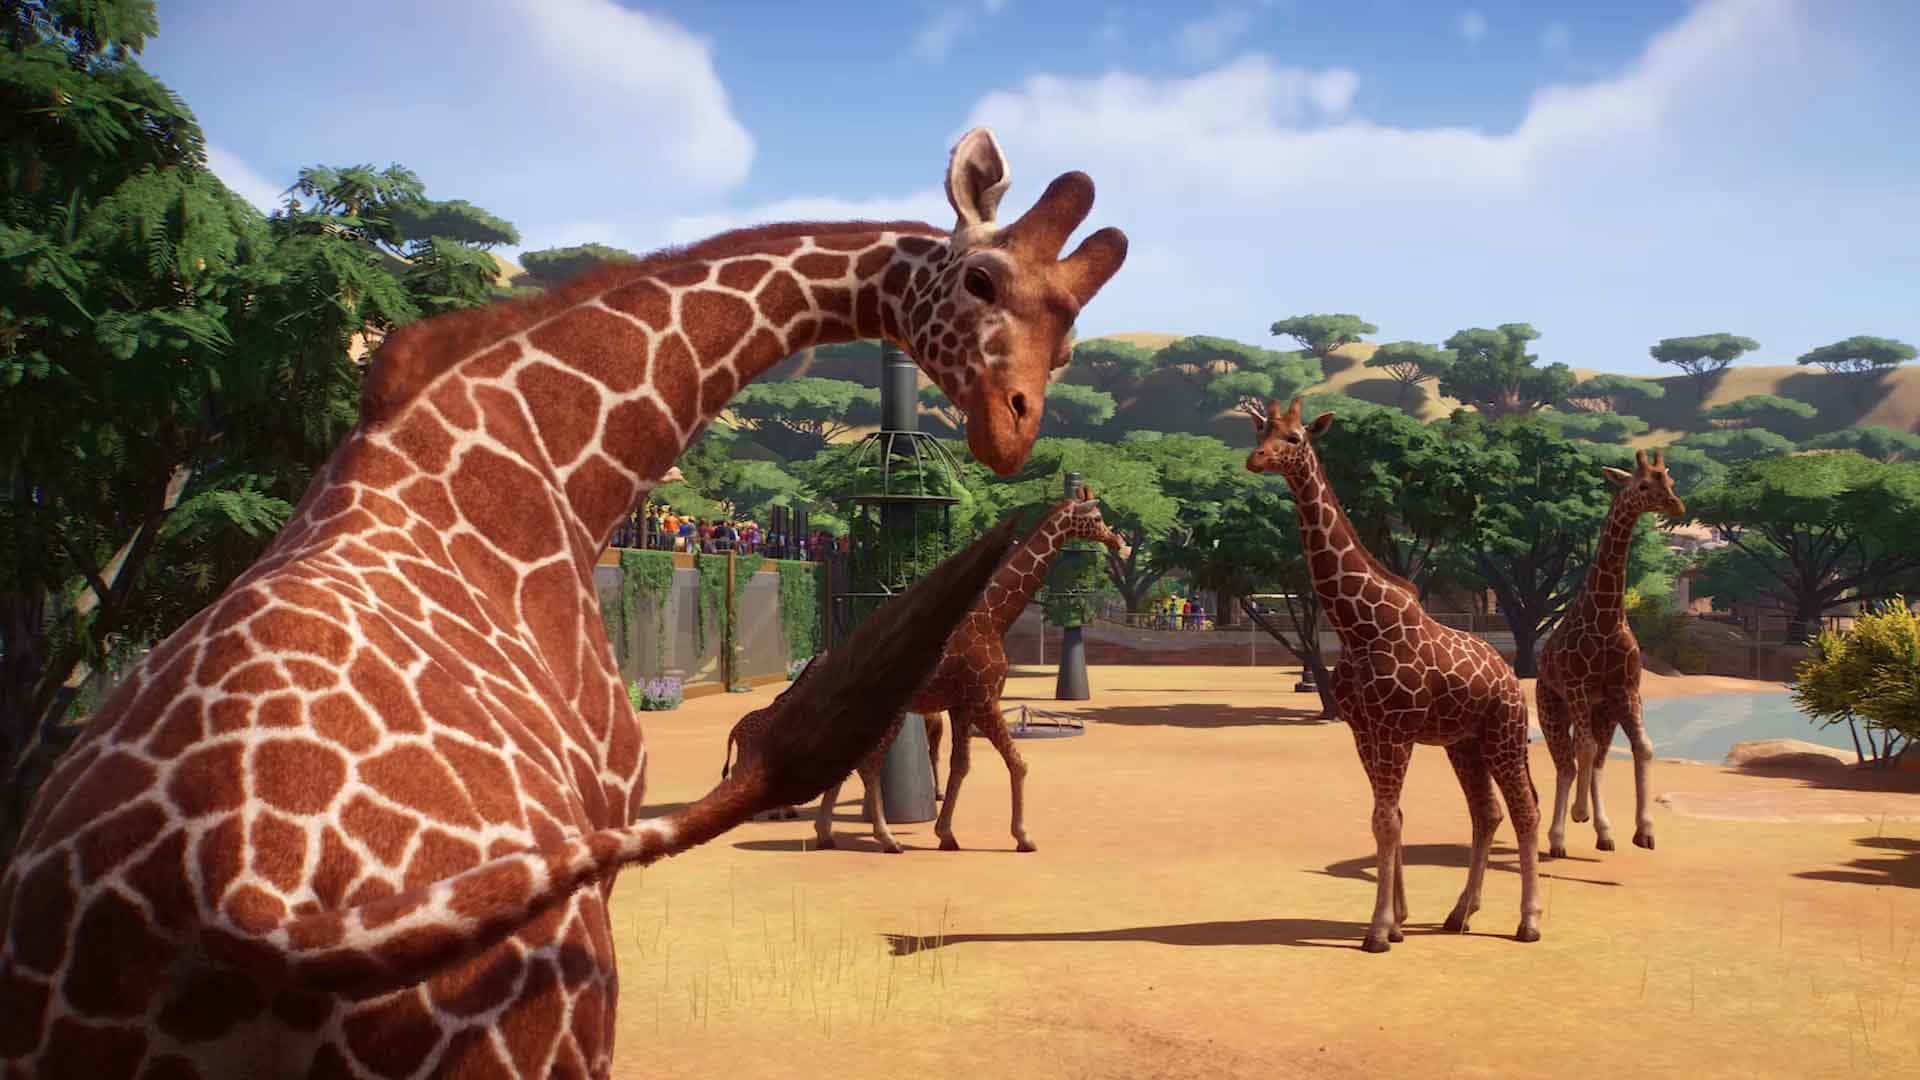 Planet Zoo: List of all animals and which ones might still come - Global  Esport News